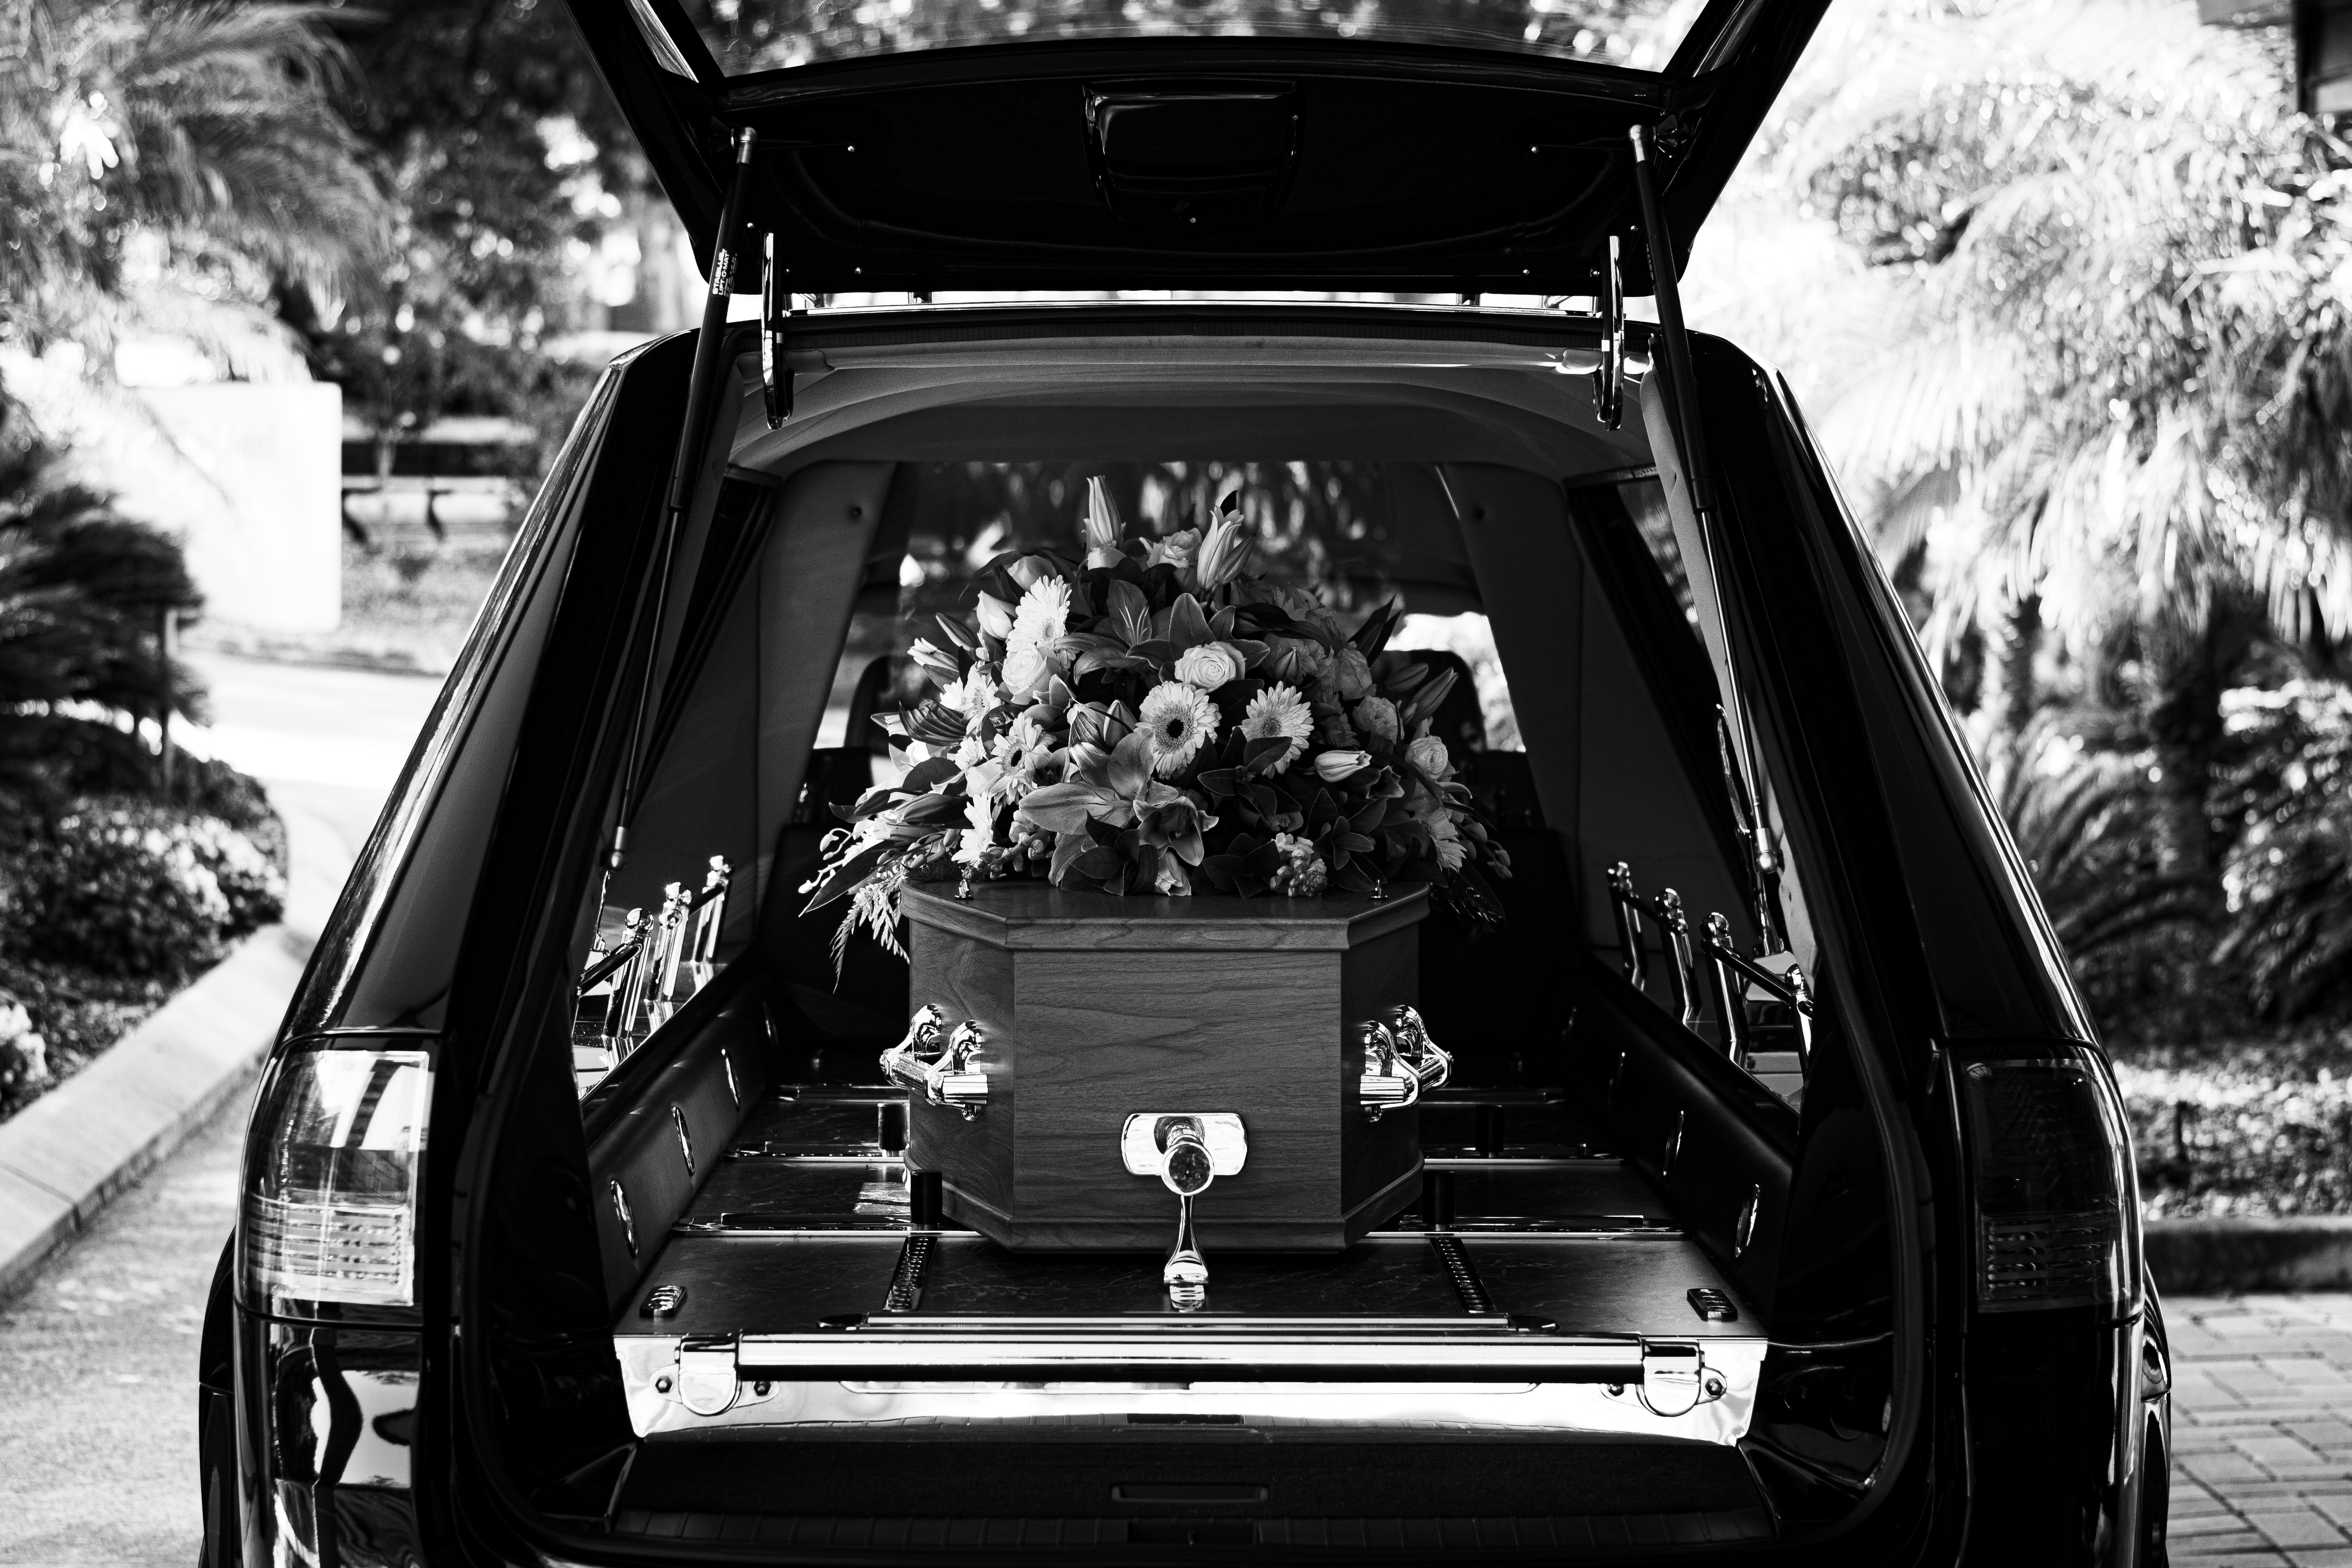 The man's uncle died shortly after & he left a surprise "gift" for him. | Source: Unsplash